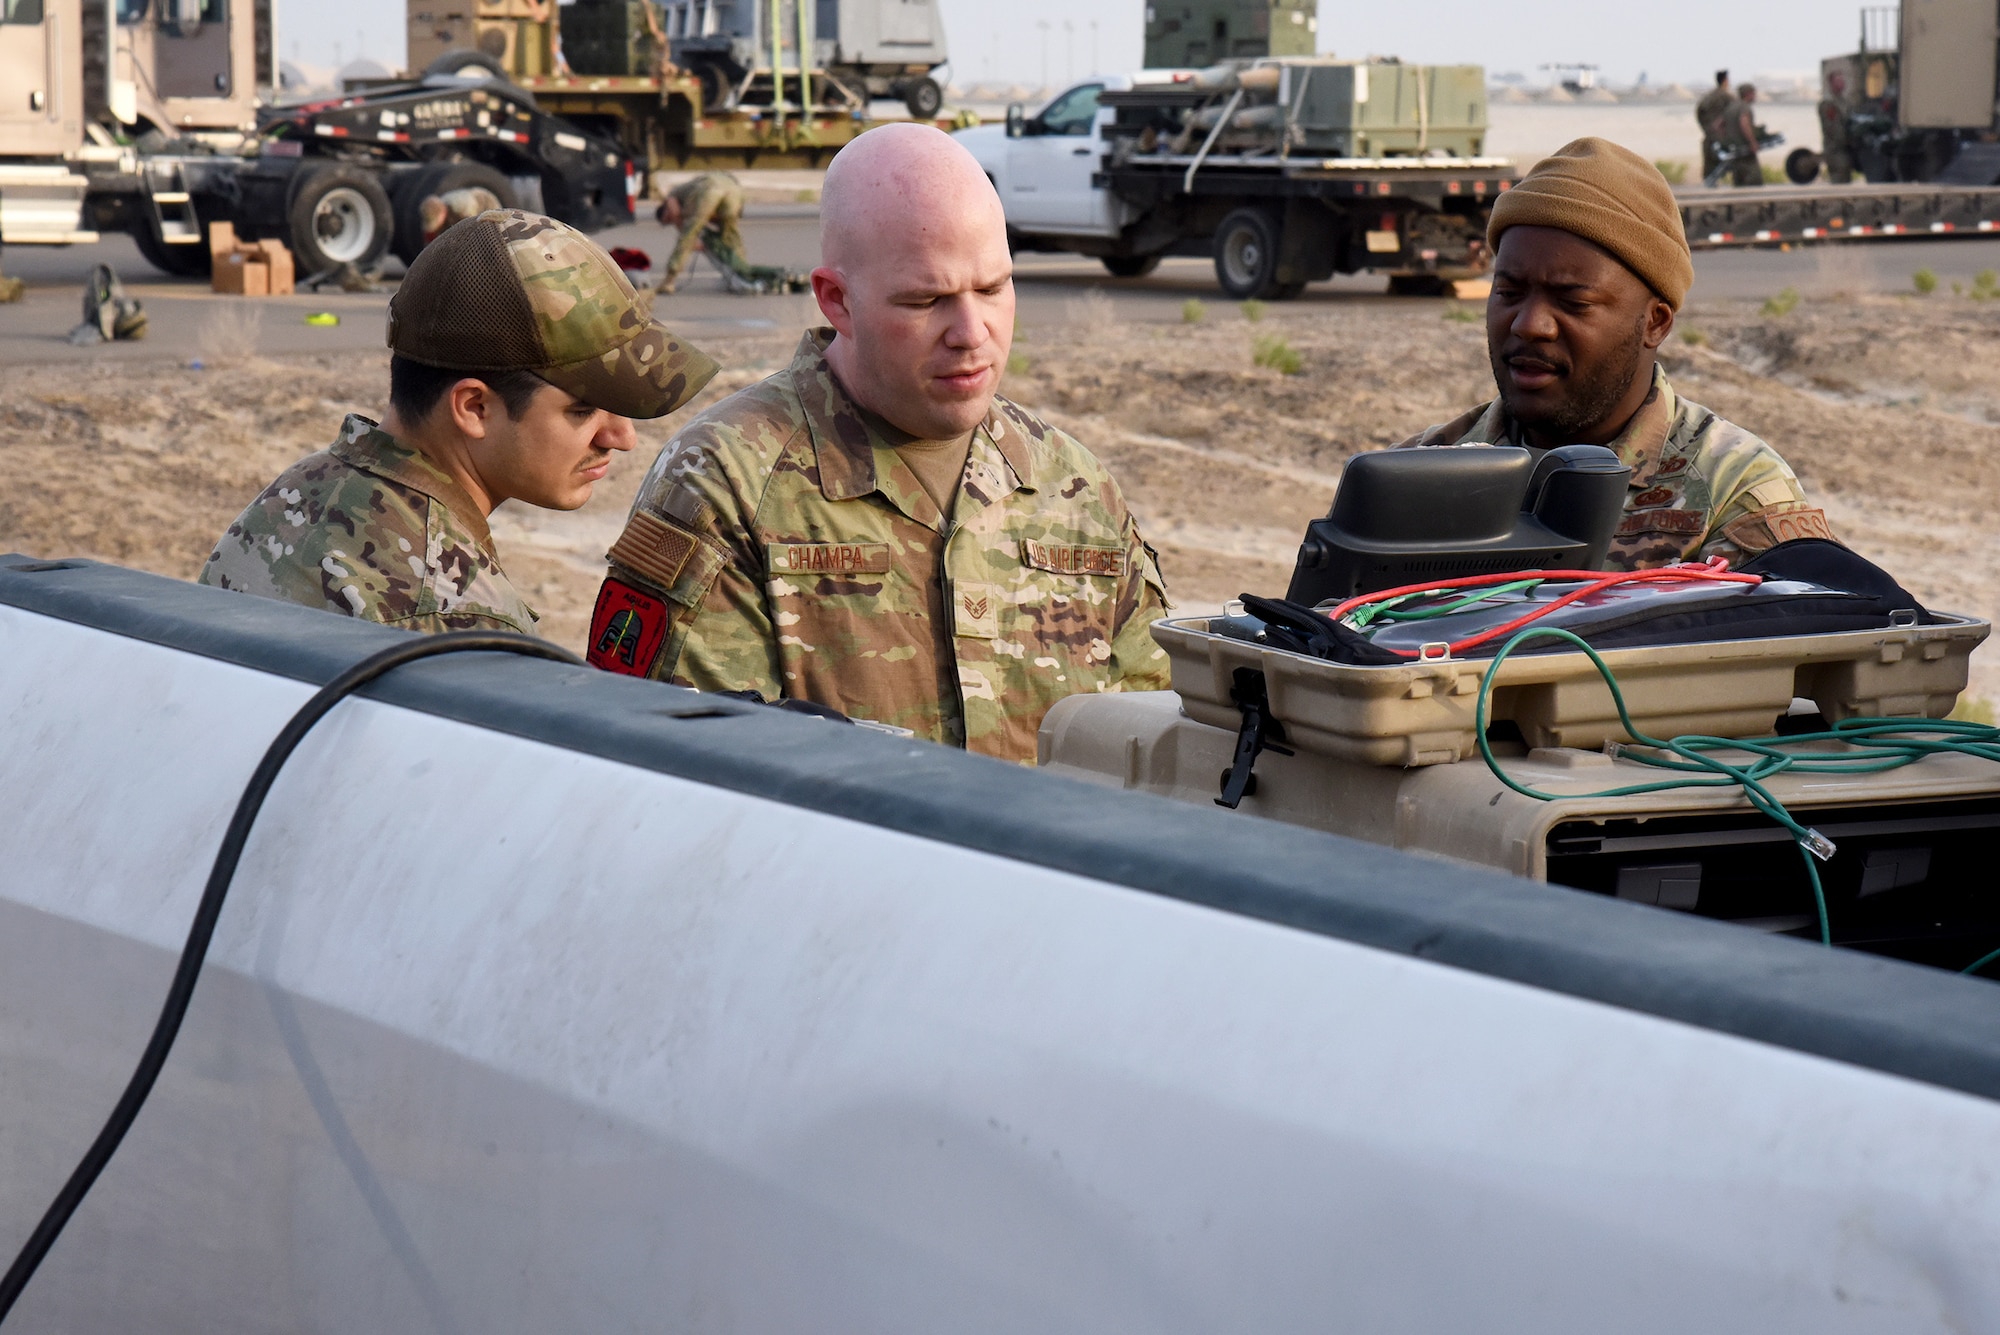 U.S. Air Force Staff Sgt. Edward Champa (center), Senior Airman Drake Conrad (left), 380th Multi-Capable Airman Team 1 members, and Lt. Col. Tony Bridgewater, Agile Combat Employment project officer, prepare to disassemble communication gear during Operation Agile Spartan 4 at Al Dhafra Air Base, United Arab Emirates, March 10, 2023. Operation Agile Spartan is a Multi-Capable Airman and Agile Combat Employment exercise that takes place across the U.S. Central Command area of responsibility. (U.S. Air Force photo by Tech. Sgt. Chris Jacobs/released)